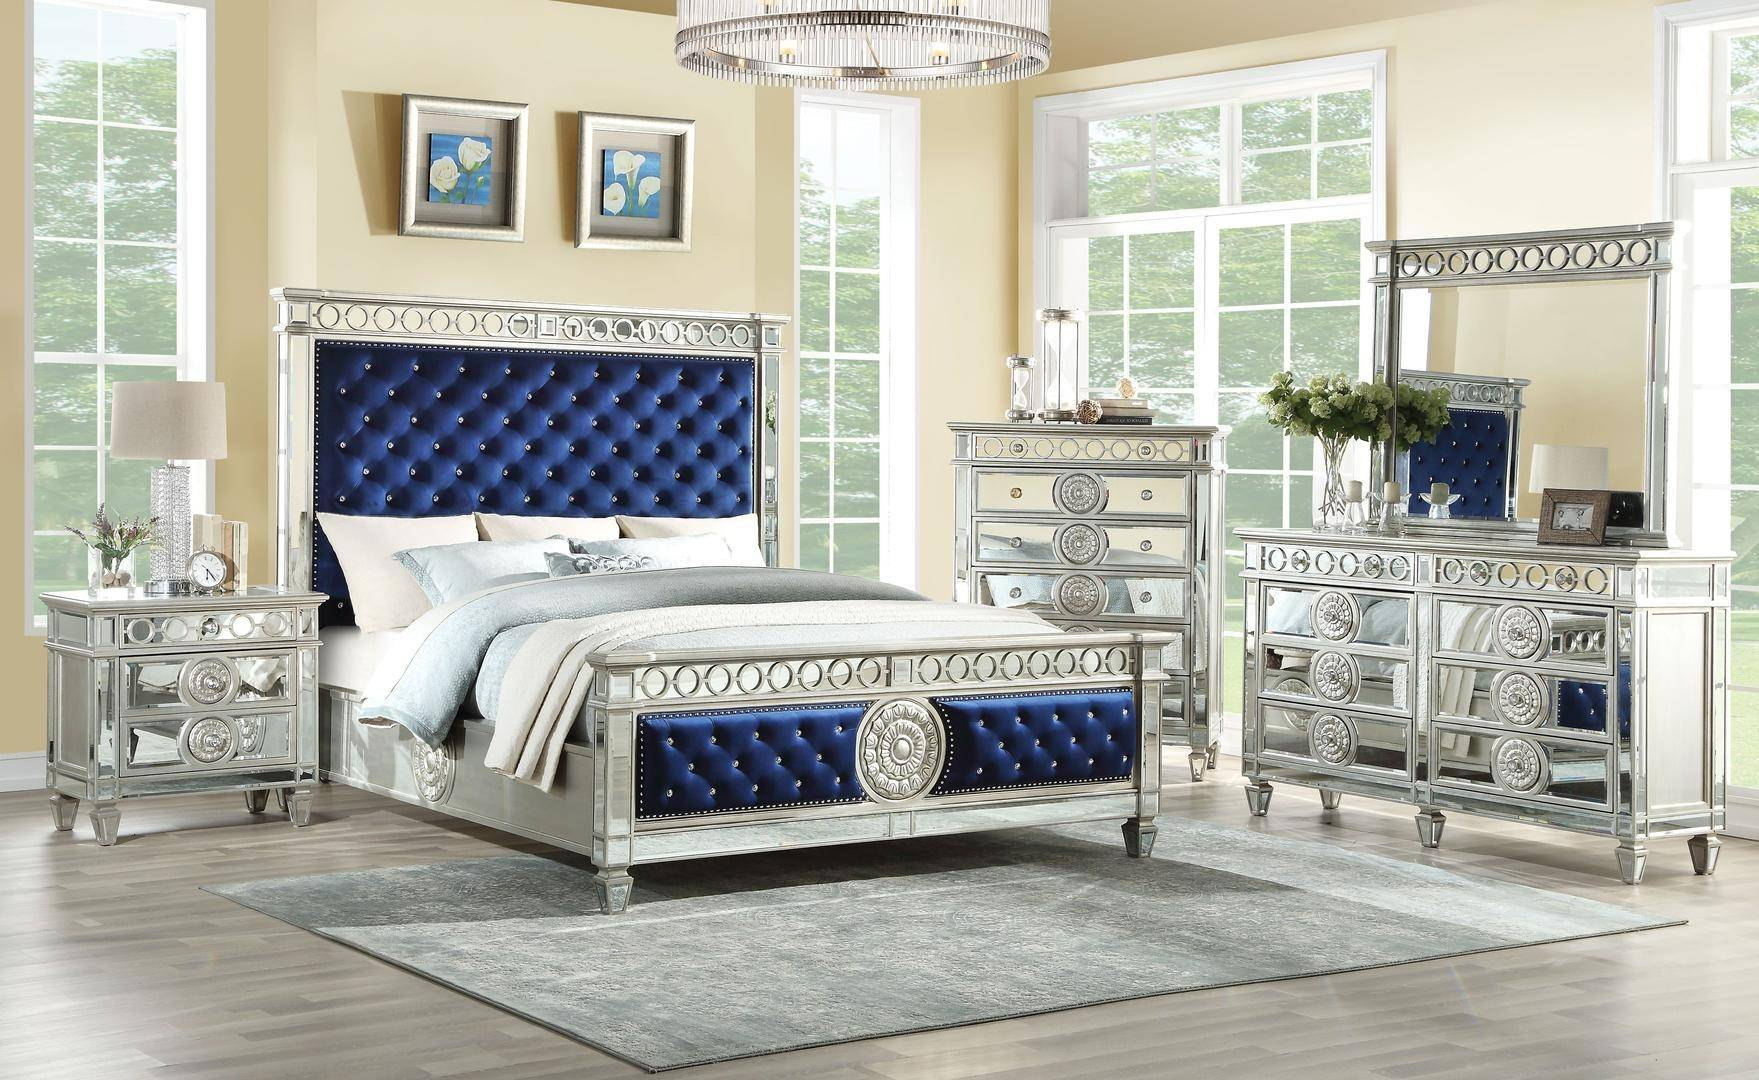 Glam King Bedroom Set 3p Blue Tufted Velvet Mirrored Inlay Varian within sizing 1759 X 1080